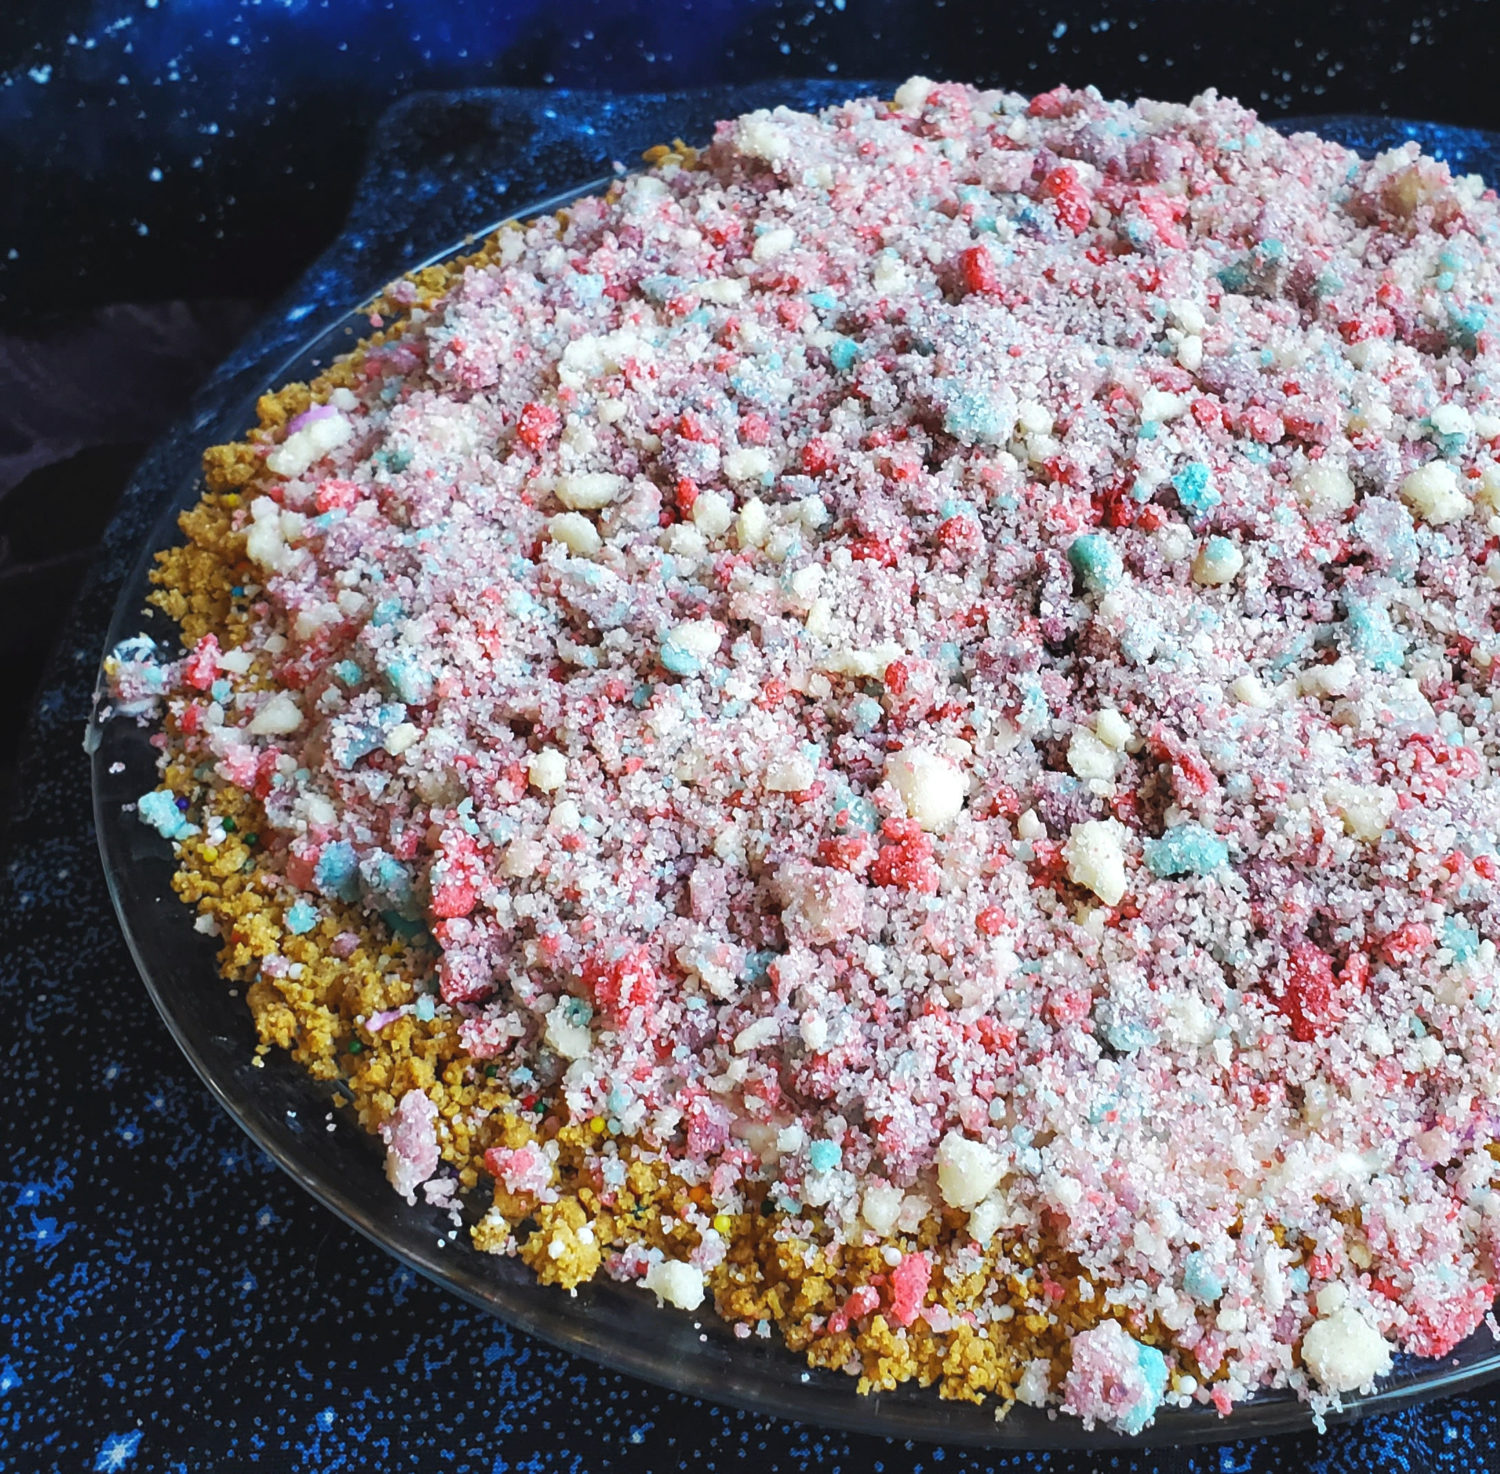 Marshmallow Moondust Pie: Creamy vanilla marshmallow filling with a swirl of color and topped with homemade fruity moondust crumbles.  